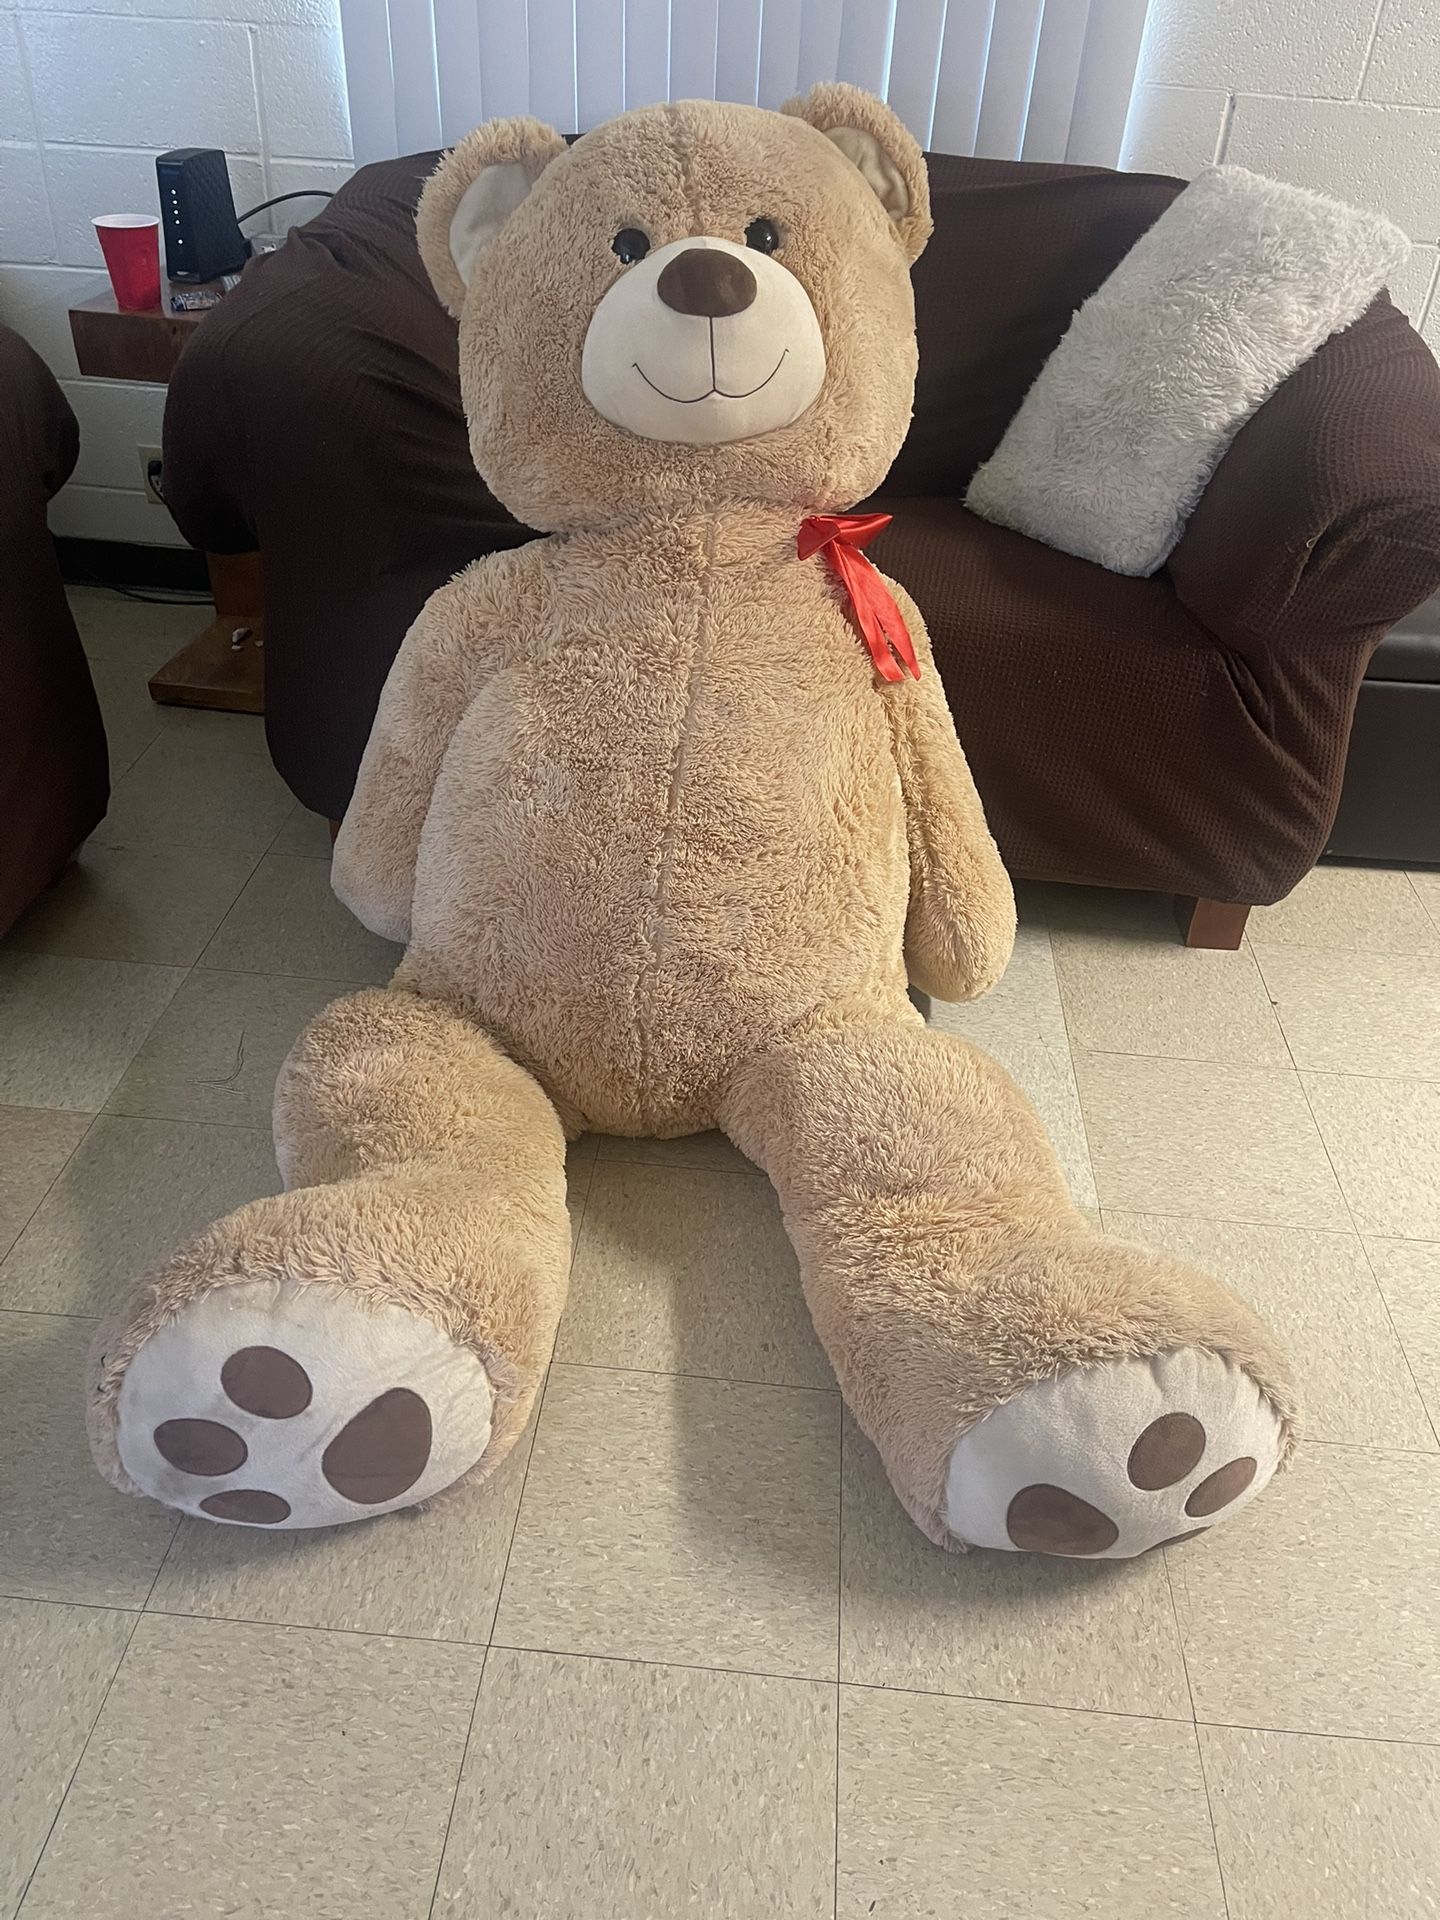 5’5 feet Bear Need Gone Going To Be Moving To A Smaller House With Smaller Rooms 